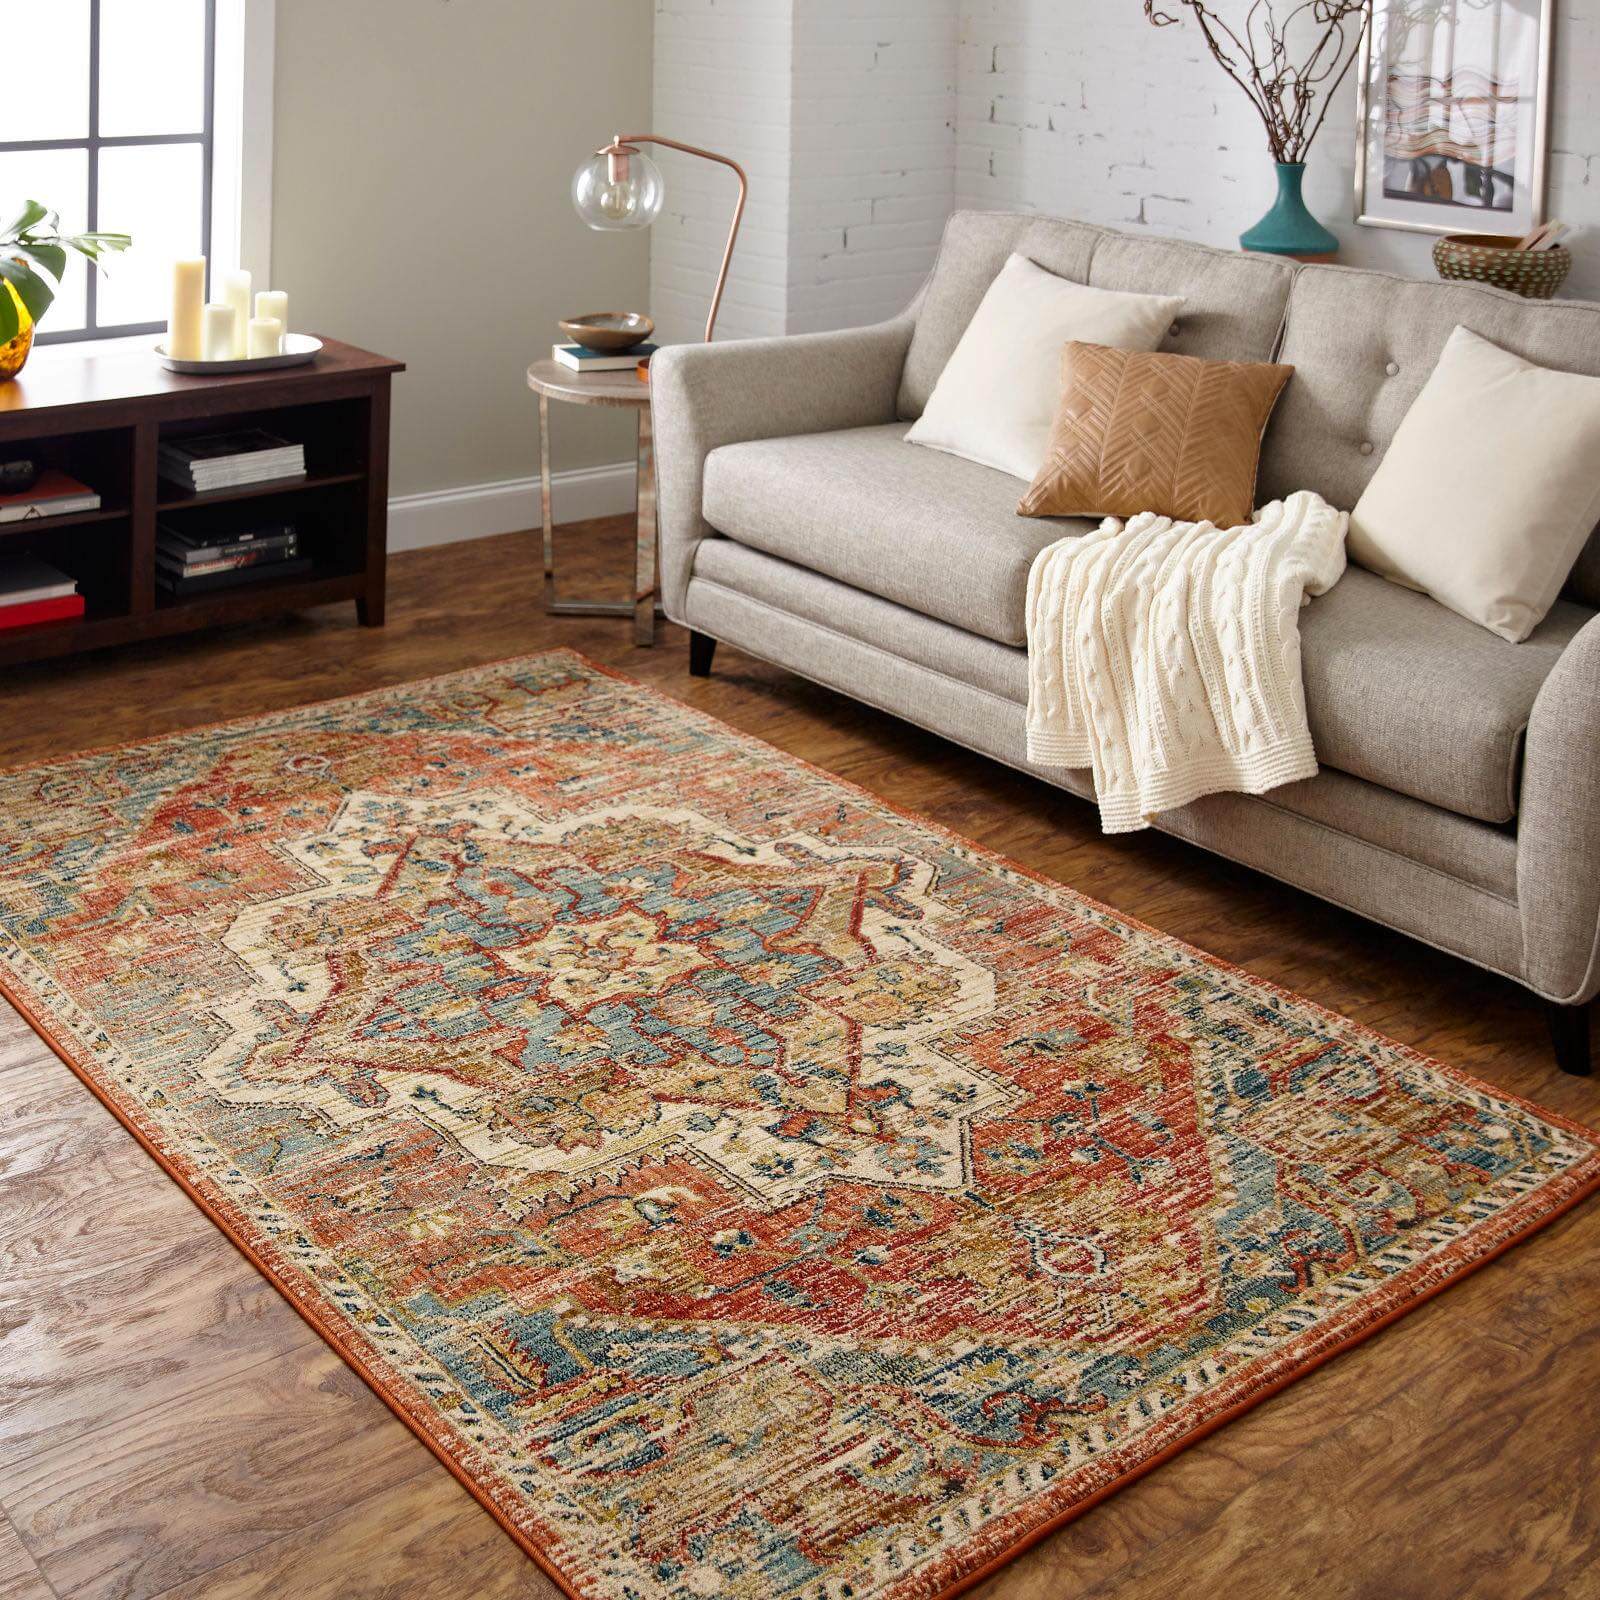 Area rug for living room | The L&L Company